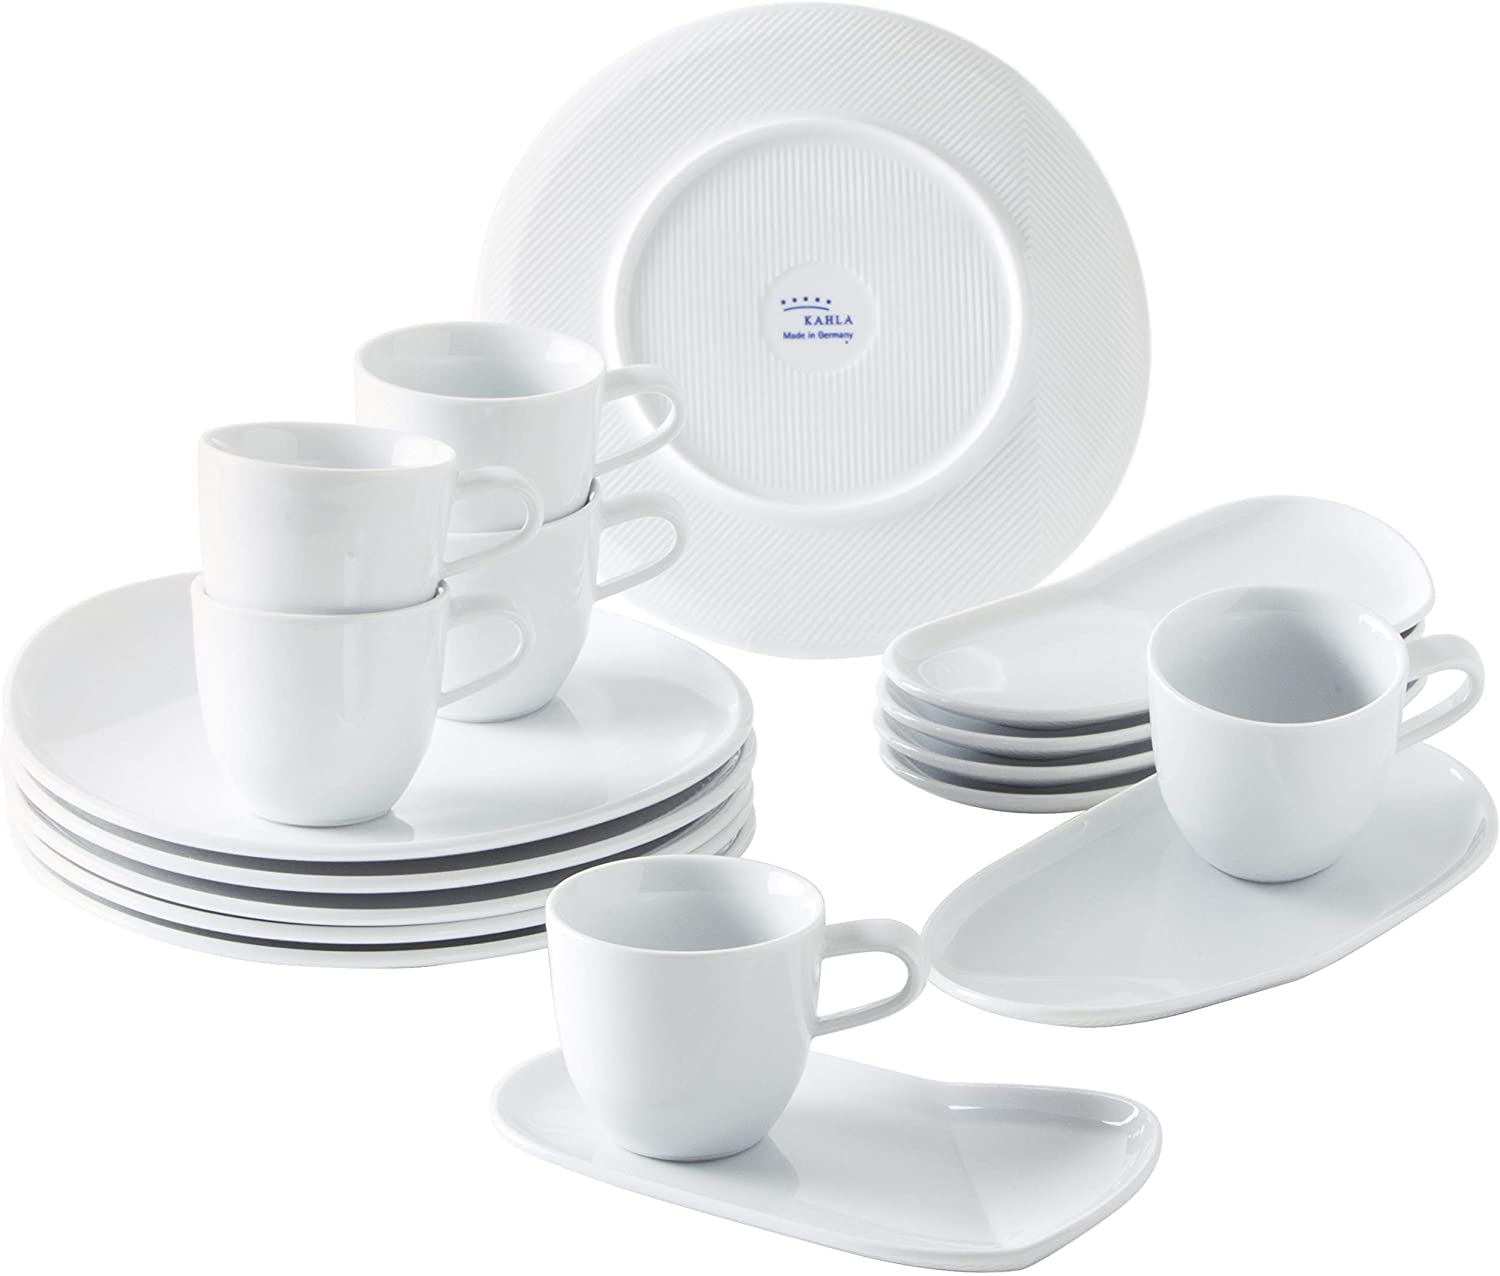 Kahla MG O - The Better Place 020430A90002C Porcelain Cups Set Modern for 6 People Coffee Service Cups Saucers Plates 18 Pieces White Coffee Set